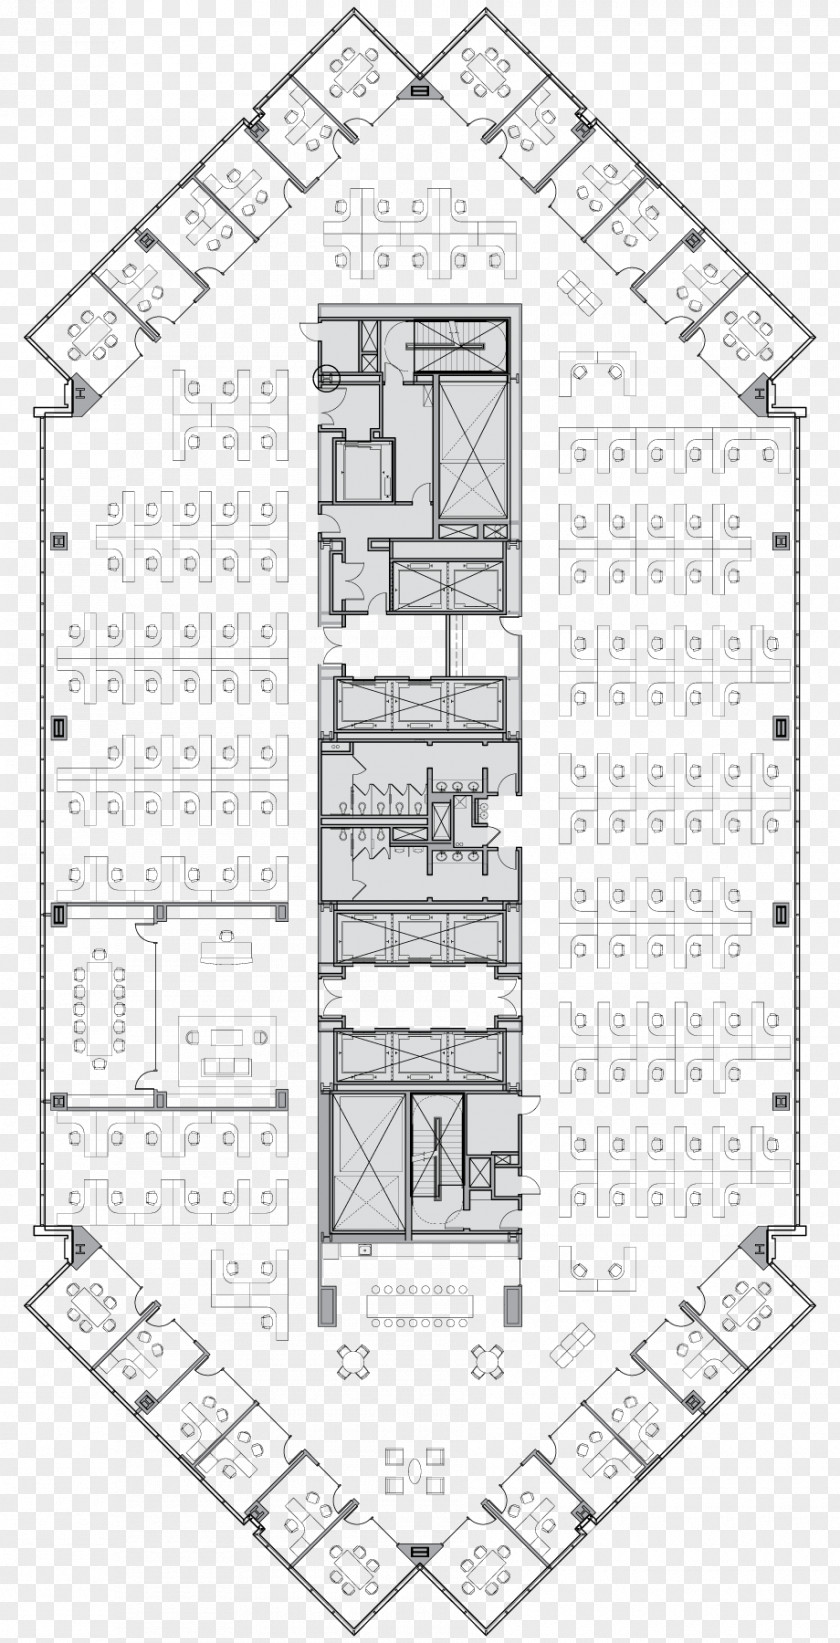 Design Floor Plan Architecture High-rise Building Architectural PNG